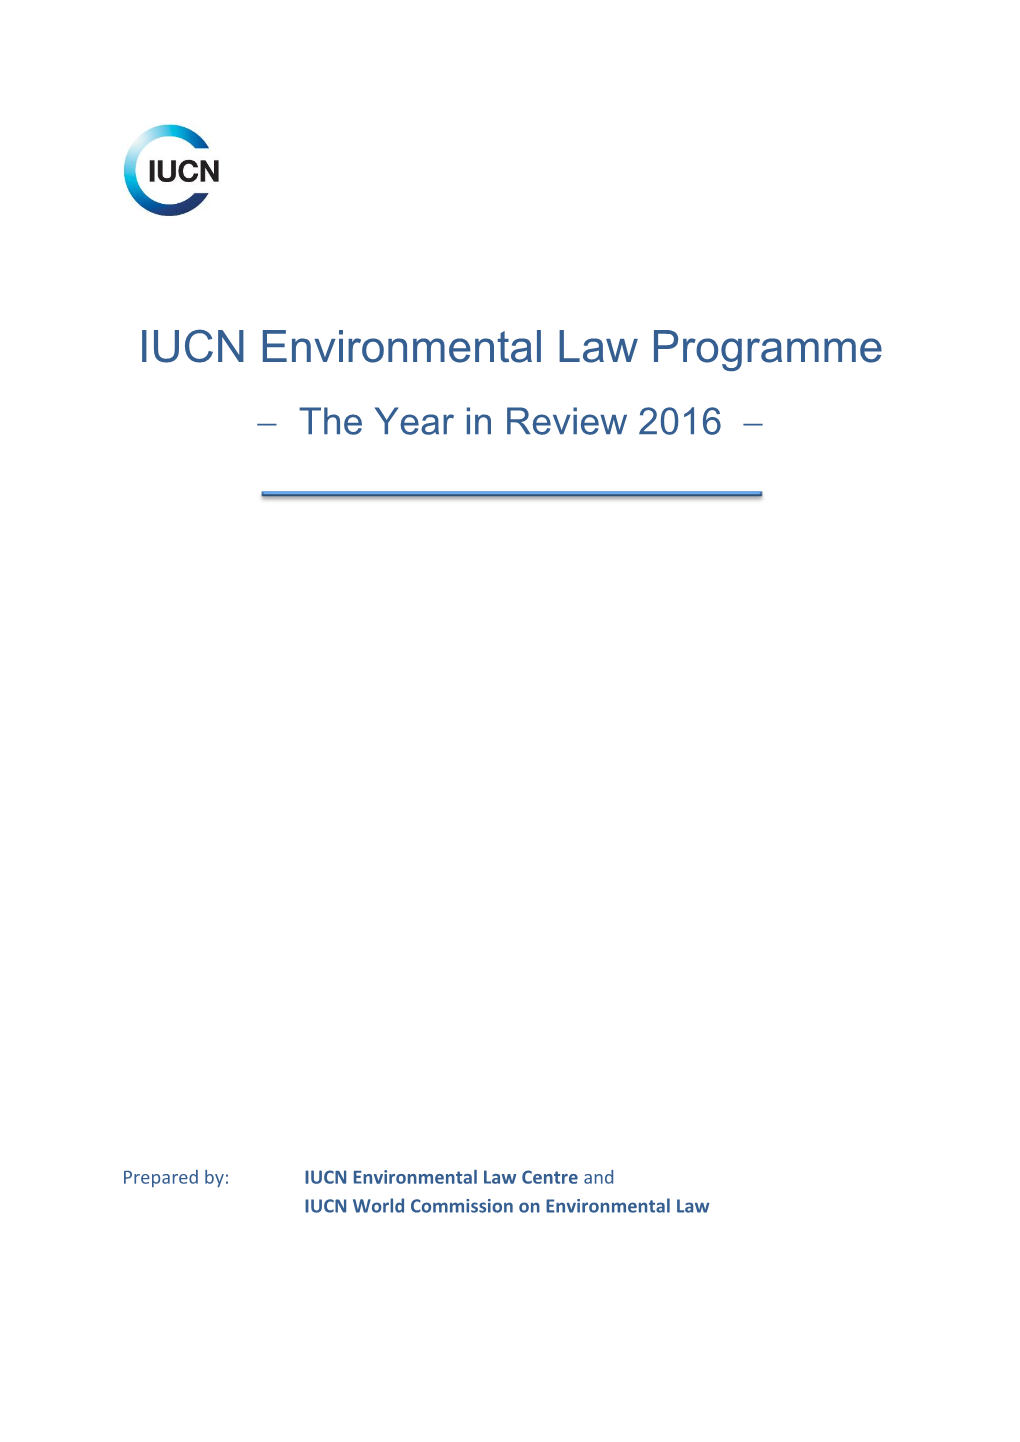 IUCN Environmental Law Programme  the Year in Review 2016 